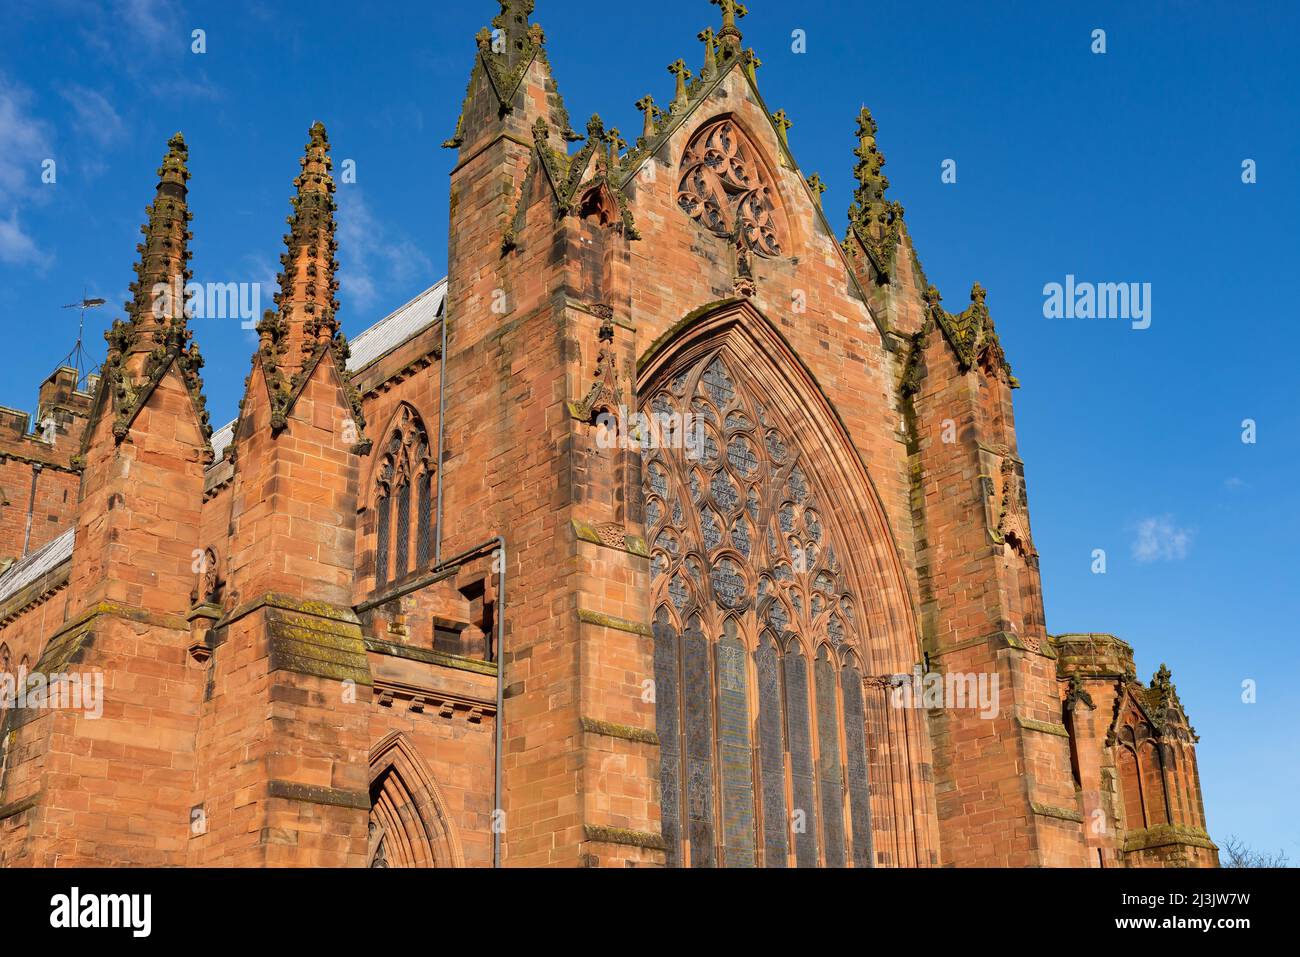 Exterior of old Cathedral in a town center on a beautiful Spring morning.  Carlisle, England. Stock Photo